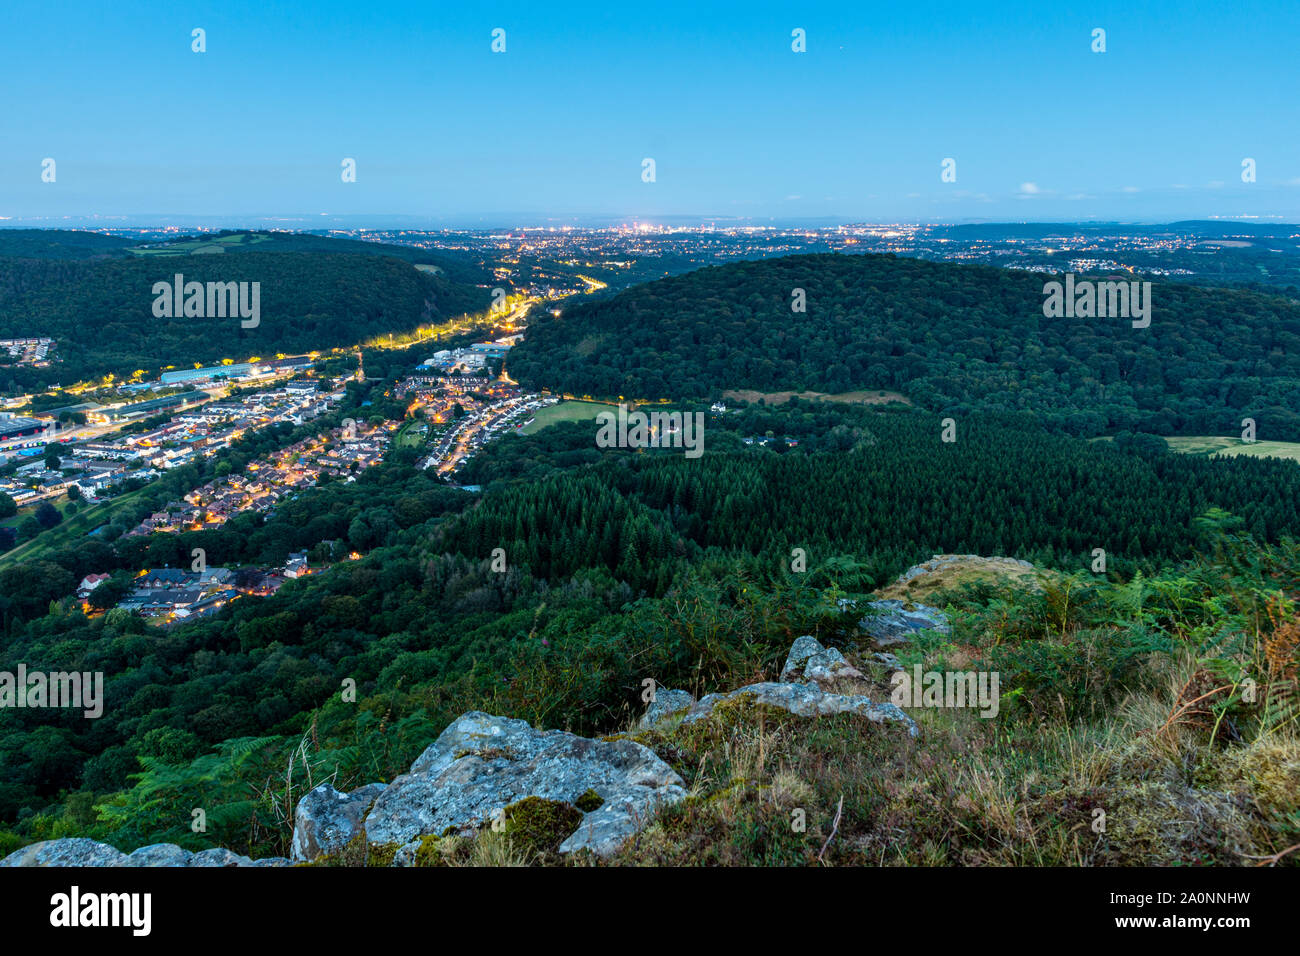 The town of Taff's Well and the cityscape of Cardiff are laid out below The Garth Mountain in South Wales. Stock Photo